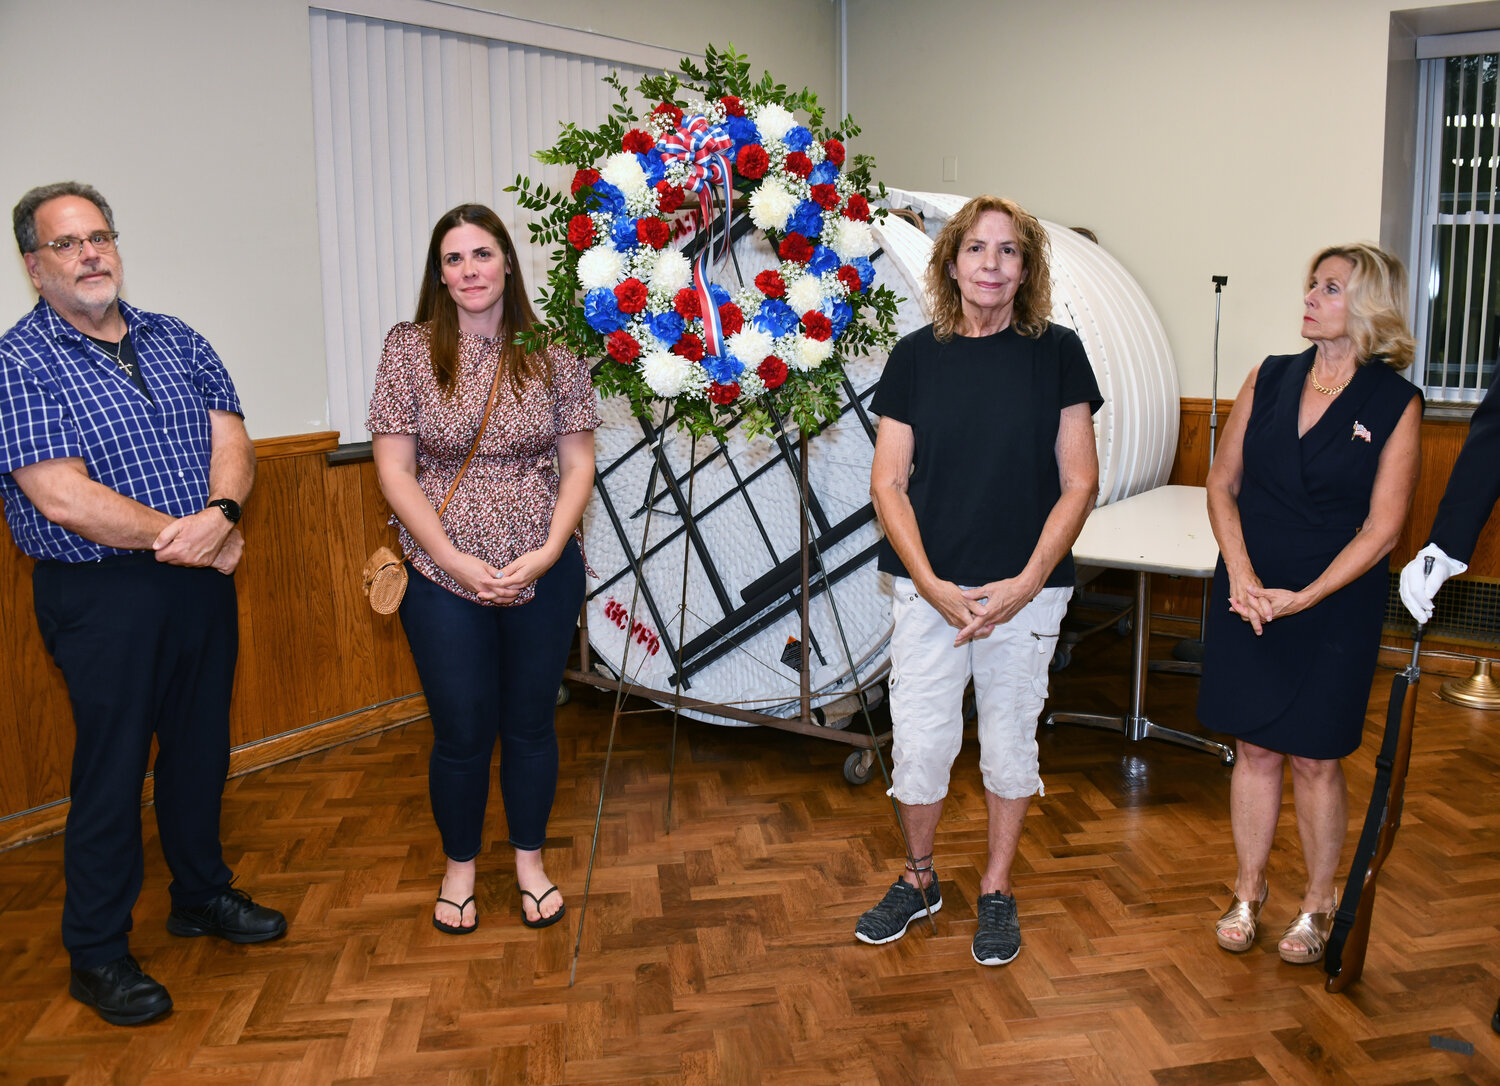 Robert and Tina Cammarata, Michelle Pukett-Formolo and Mayor Pamela Panzenbeck laid a wreath in memory of the victims of the terrorist attacks.